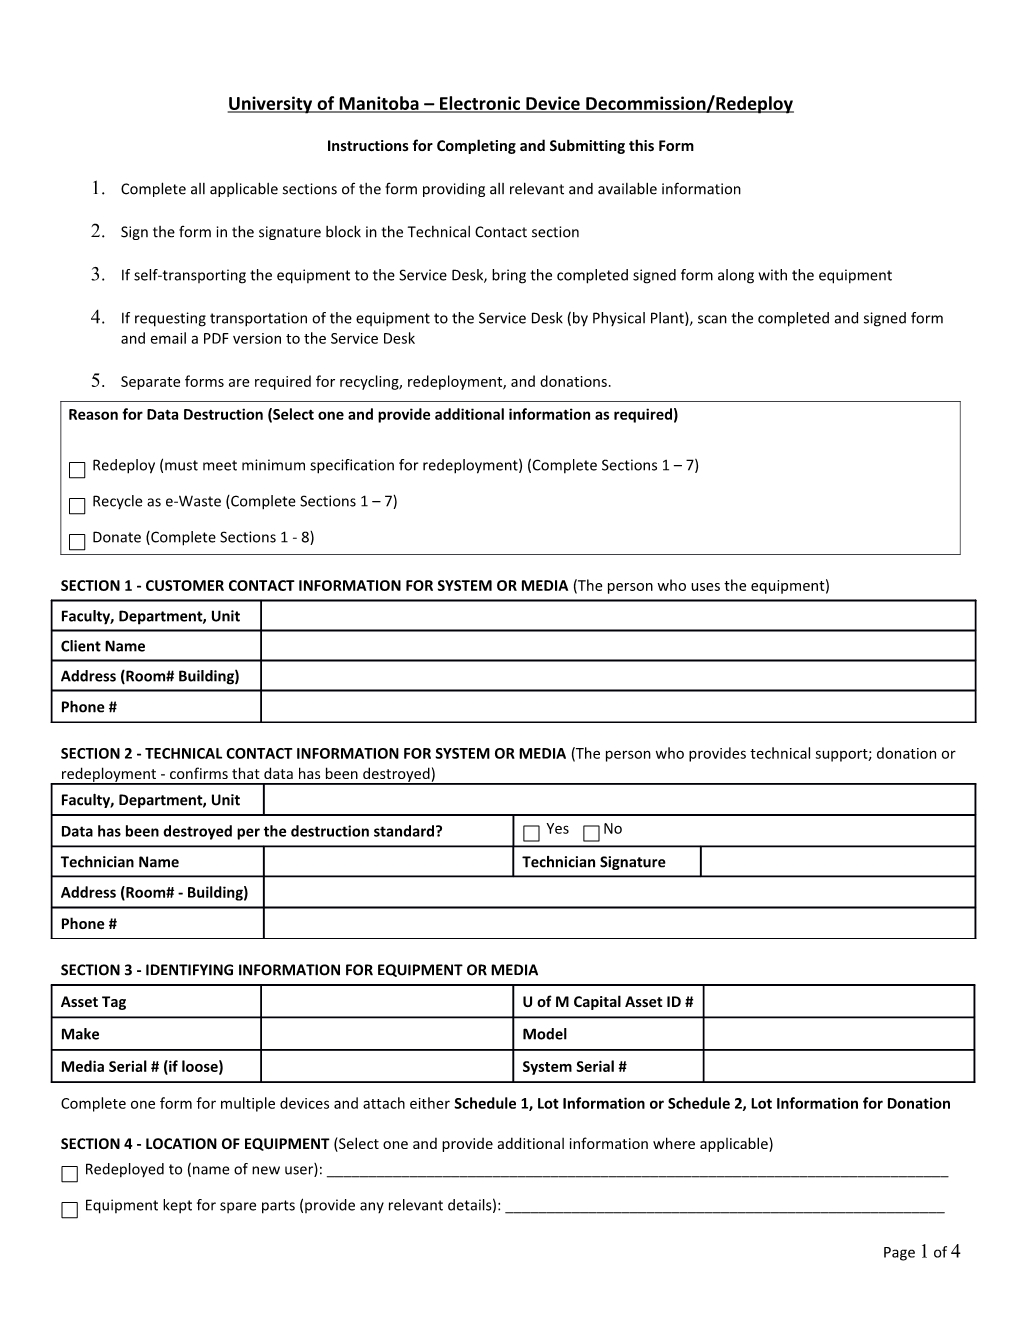 Instructions for Completing and Submitting This Form